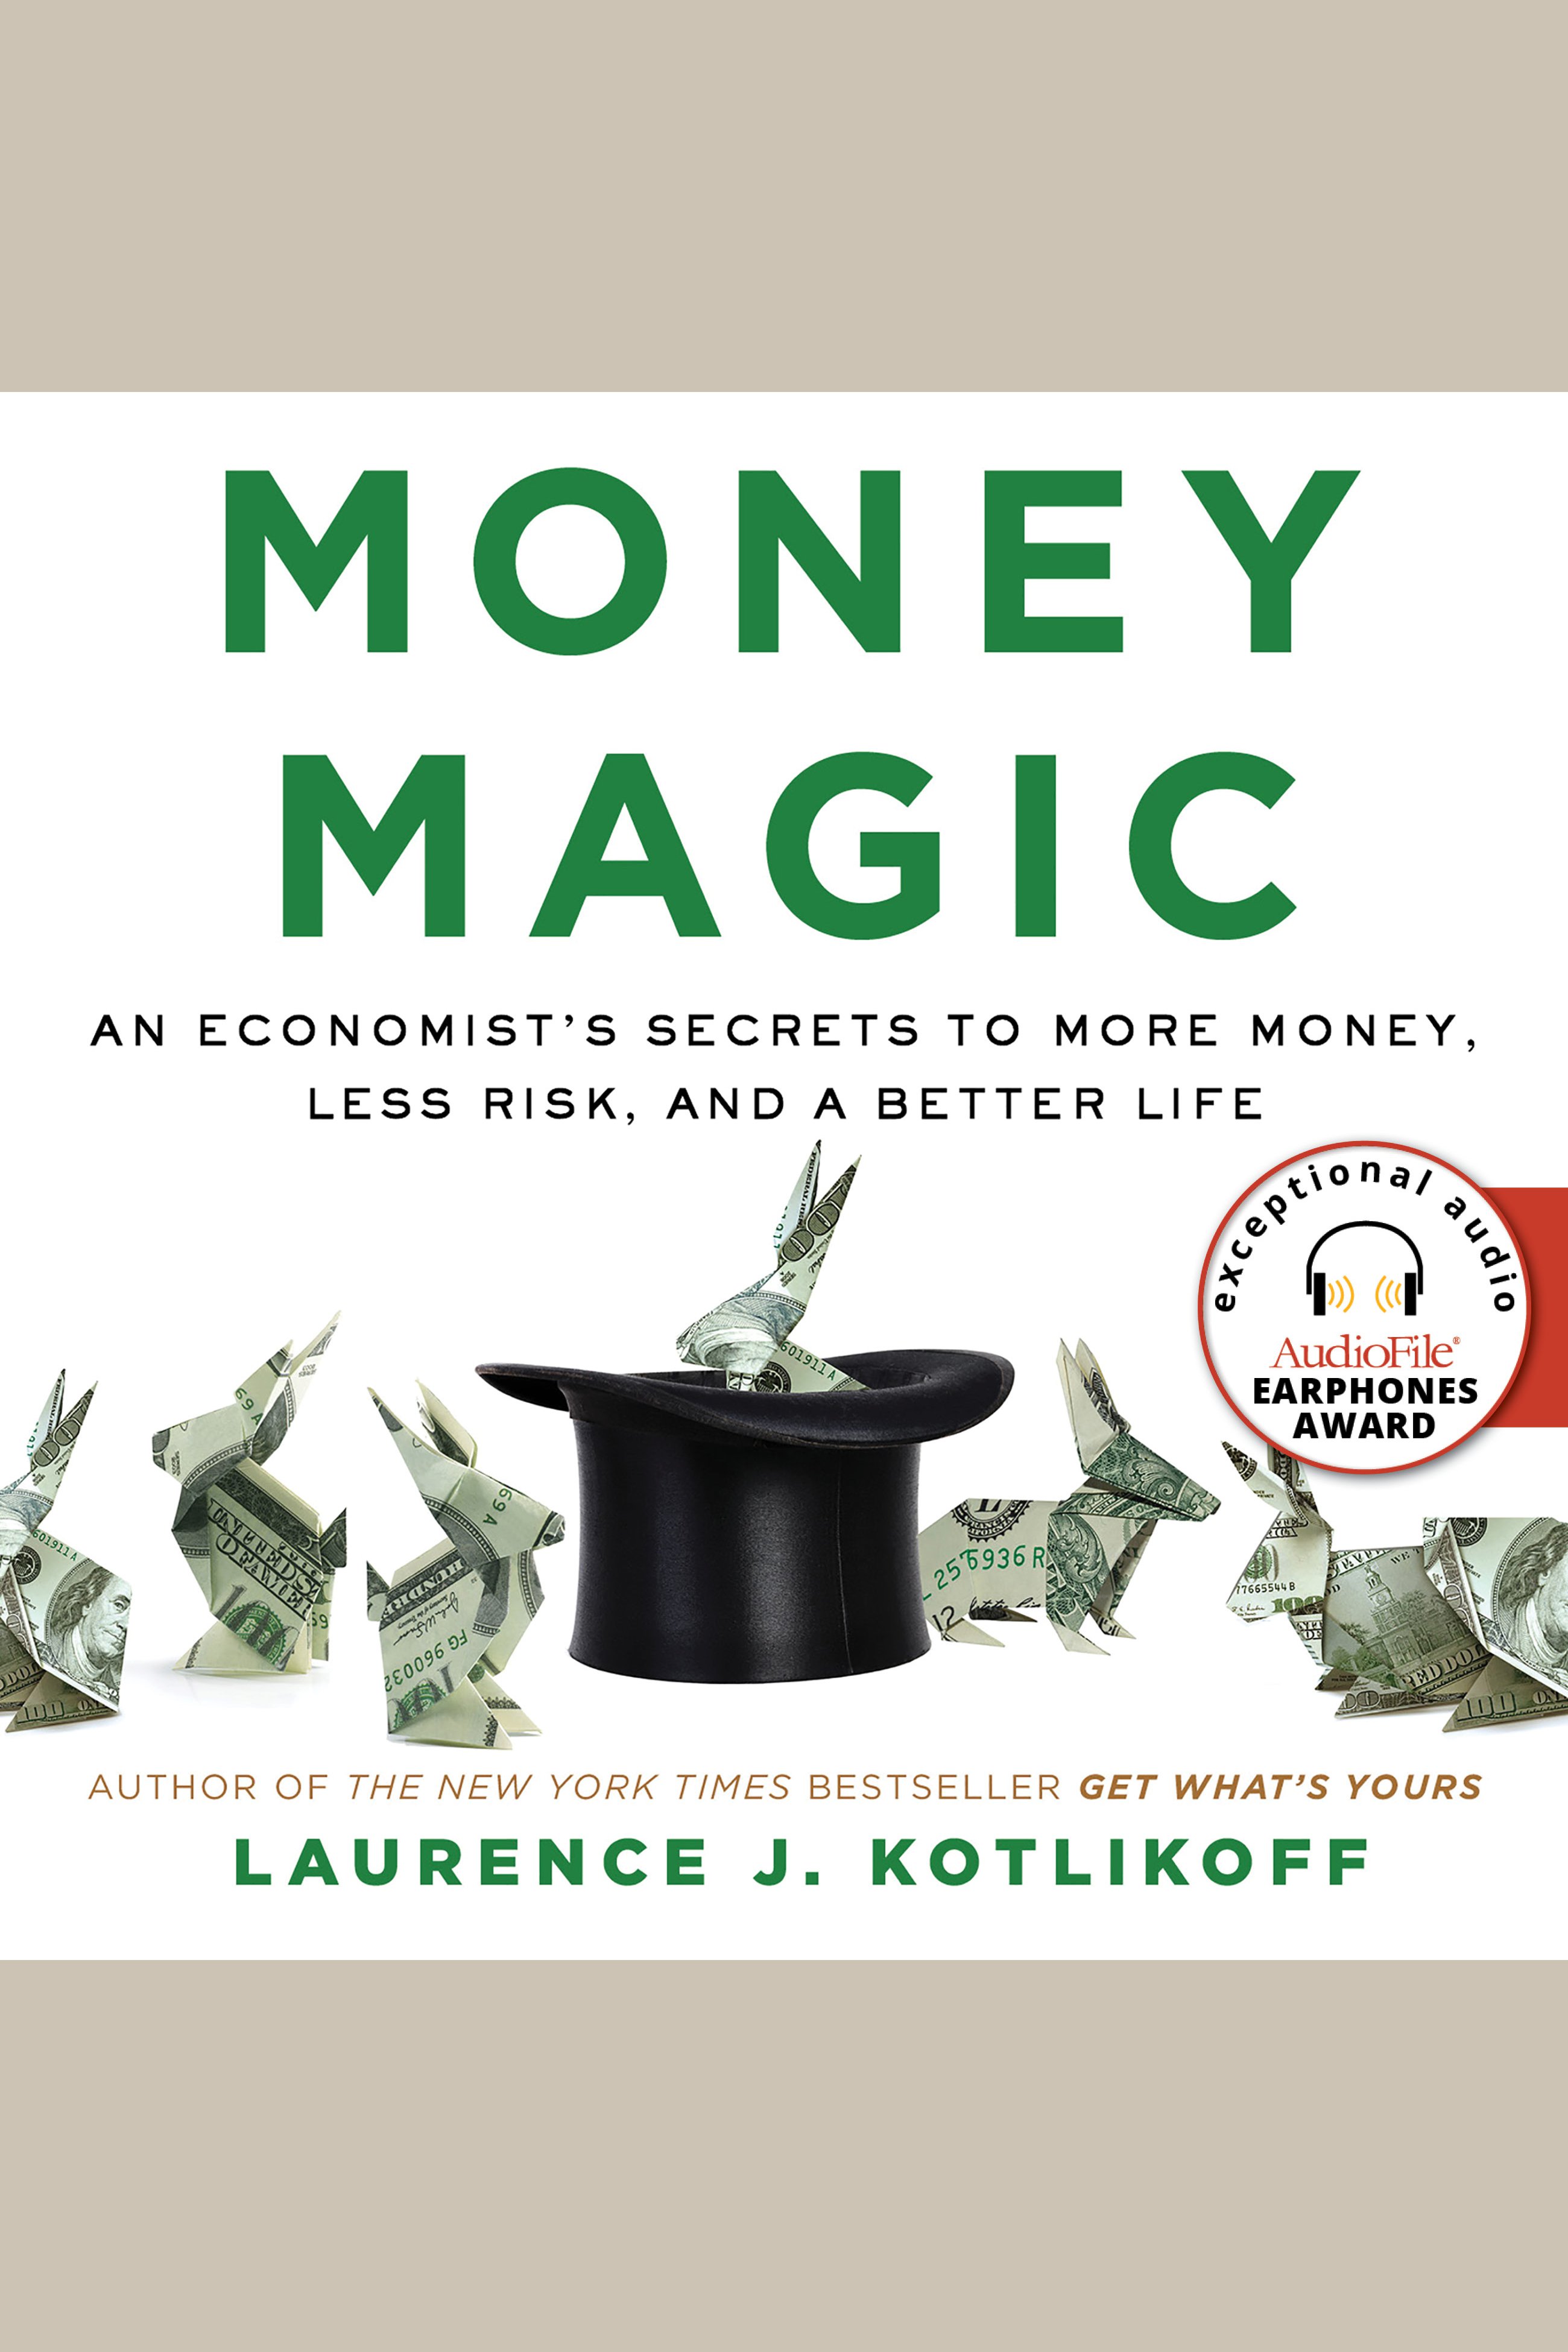 Money Magic An Economist's Secrets to More Money, Less Risk, and a Better Life cover image